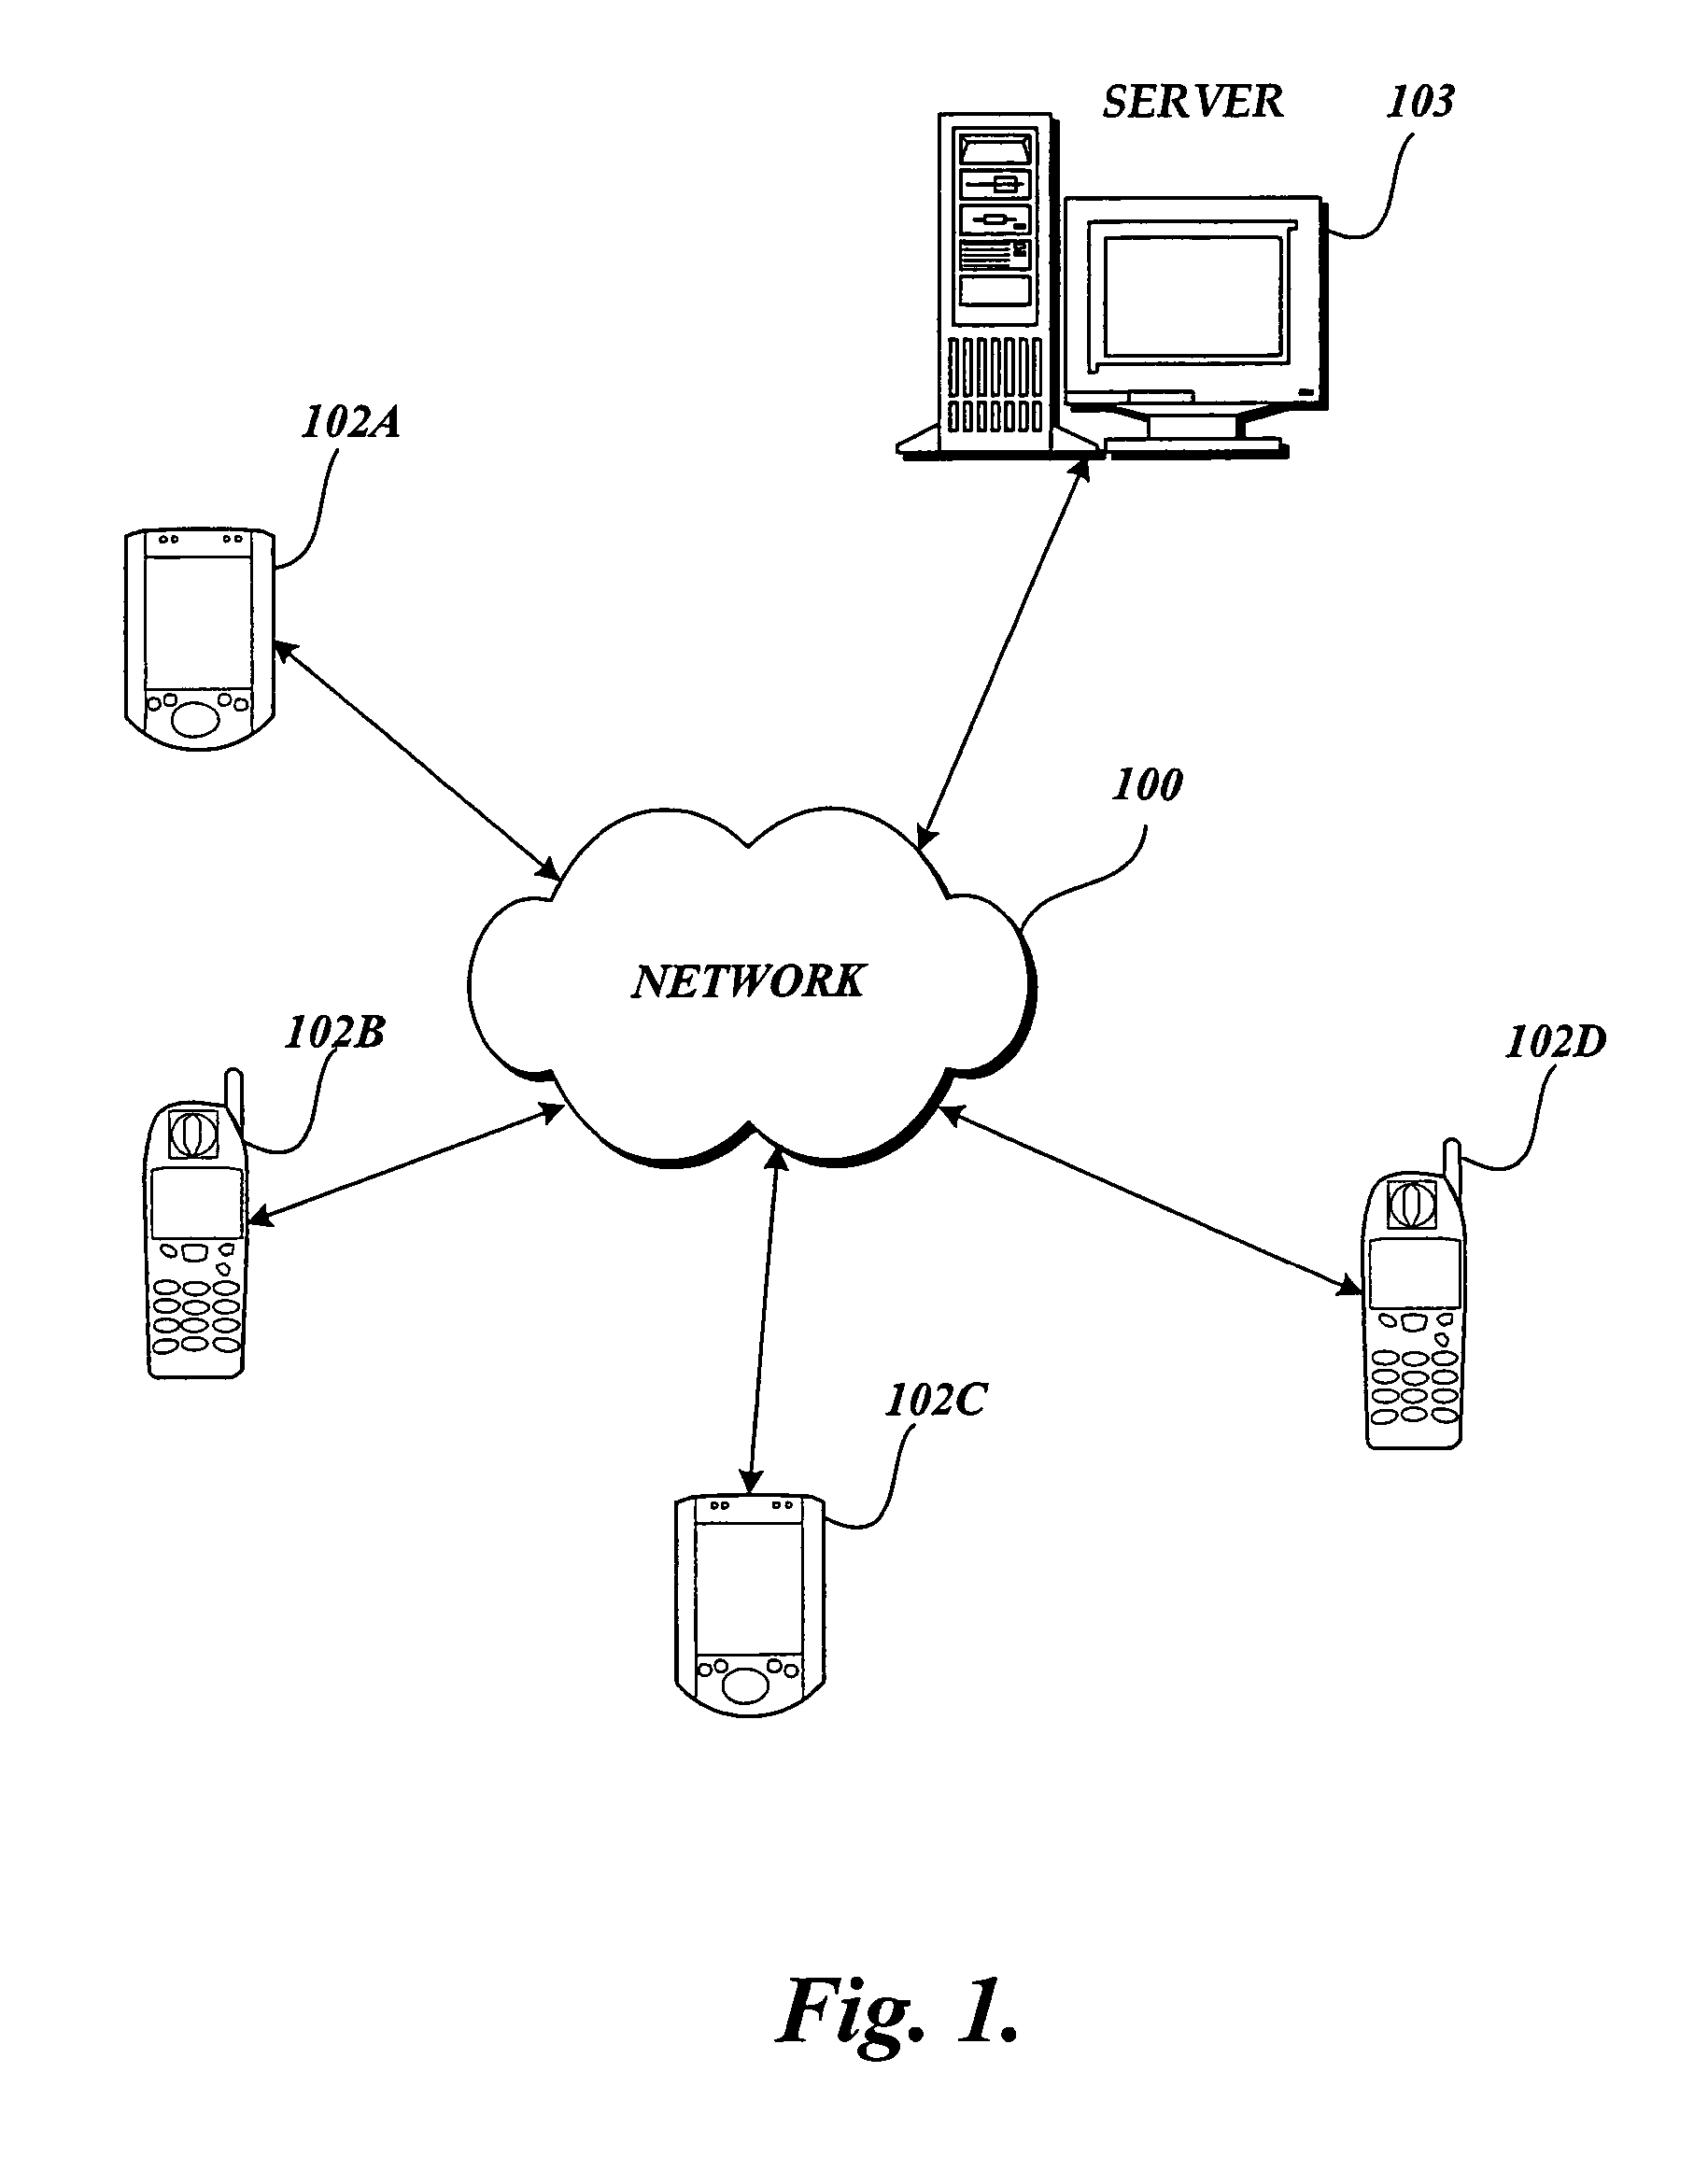 System and method for obtaining information relating to an item of commerce using a portable imaging device